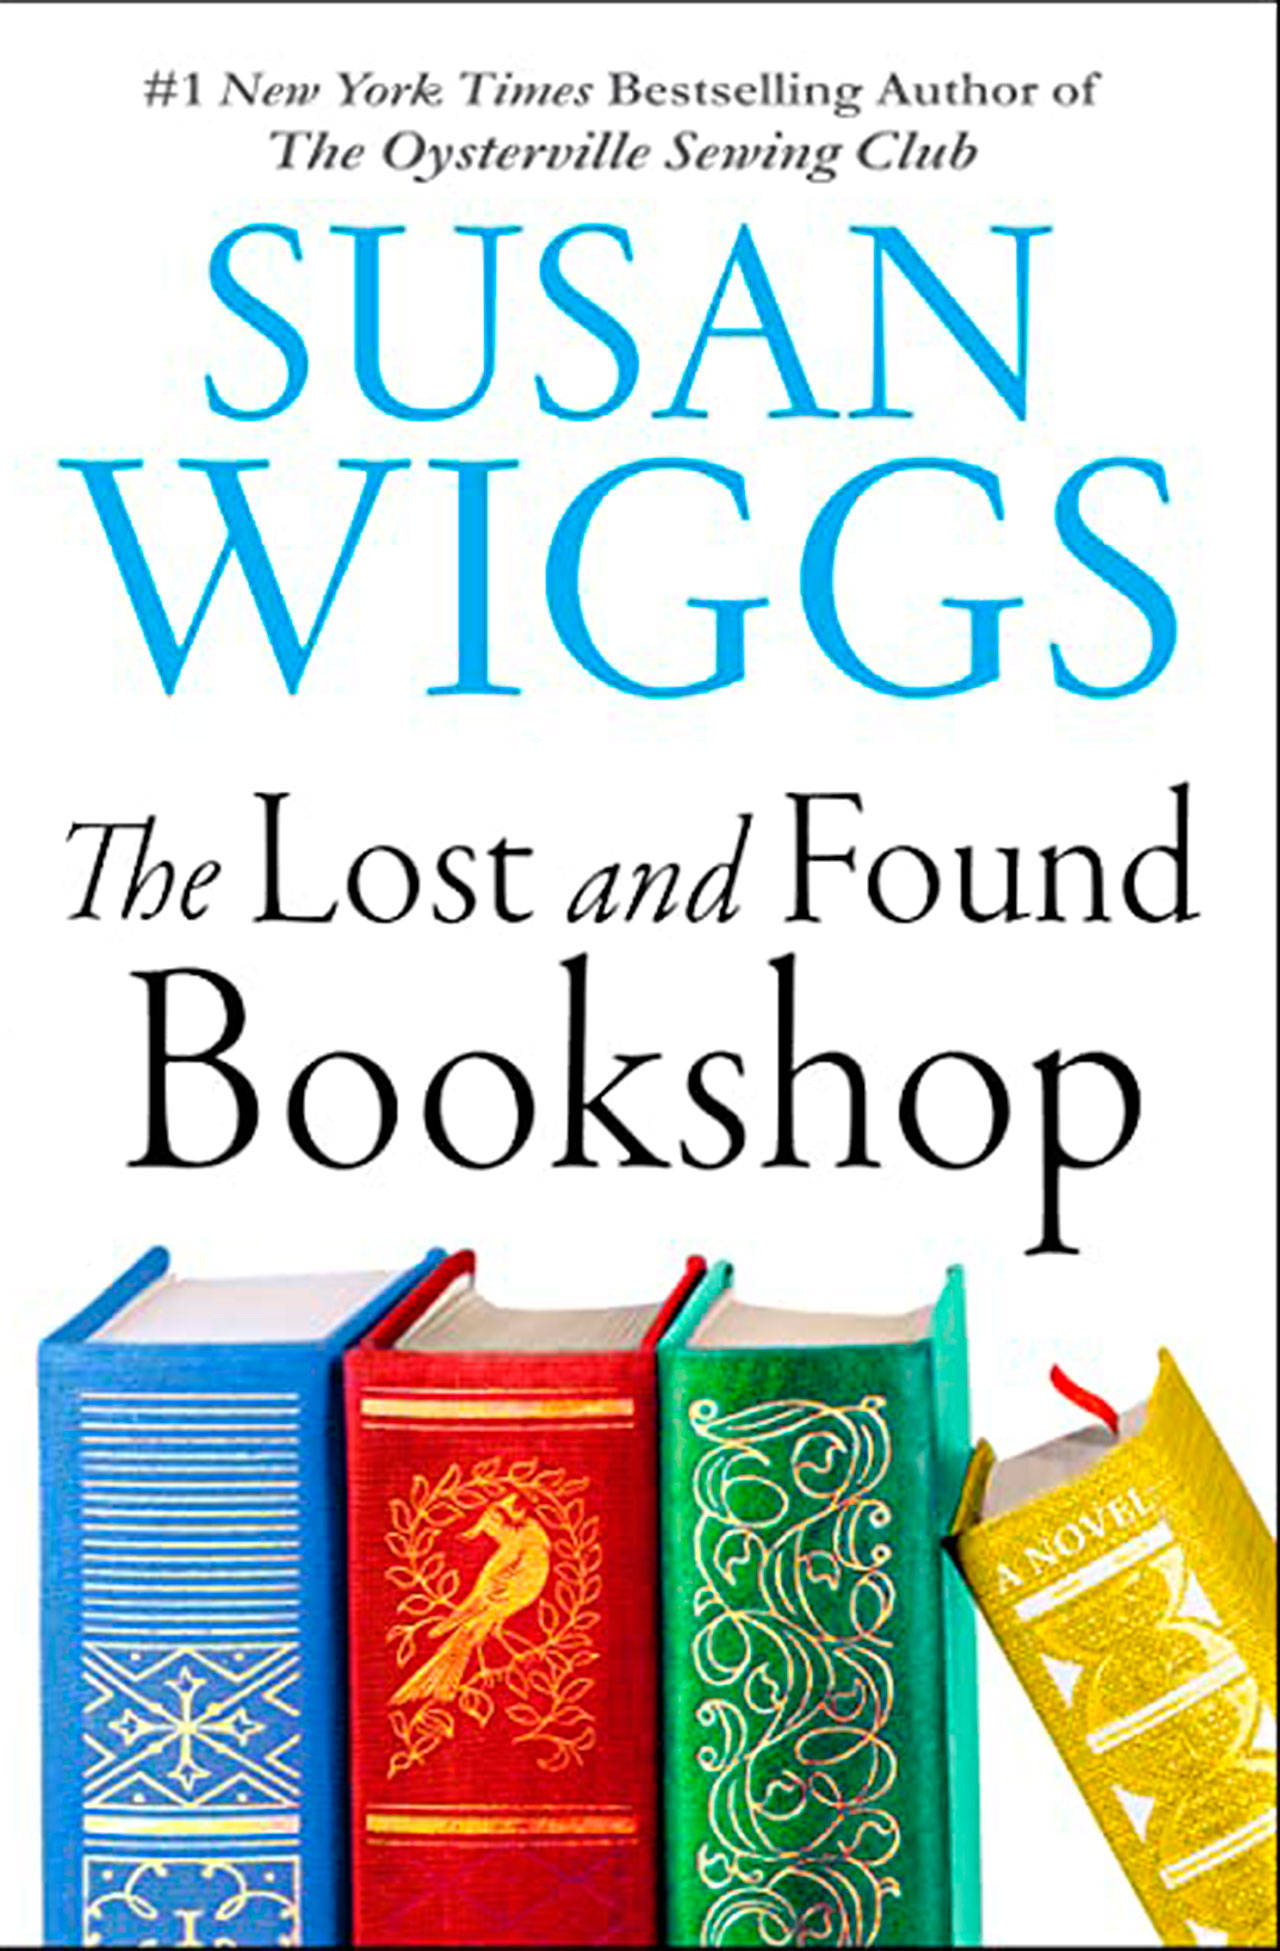 Image courtesy of Eagle Harbor Book Company | Bestselling Bainbridge author Susan Wiggs’ latest novel, “The Lost and Found Bookshop” will go on sale Tuesday, July 7.